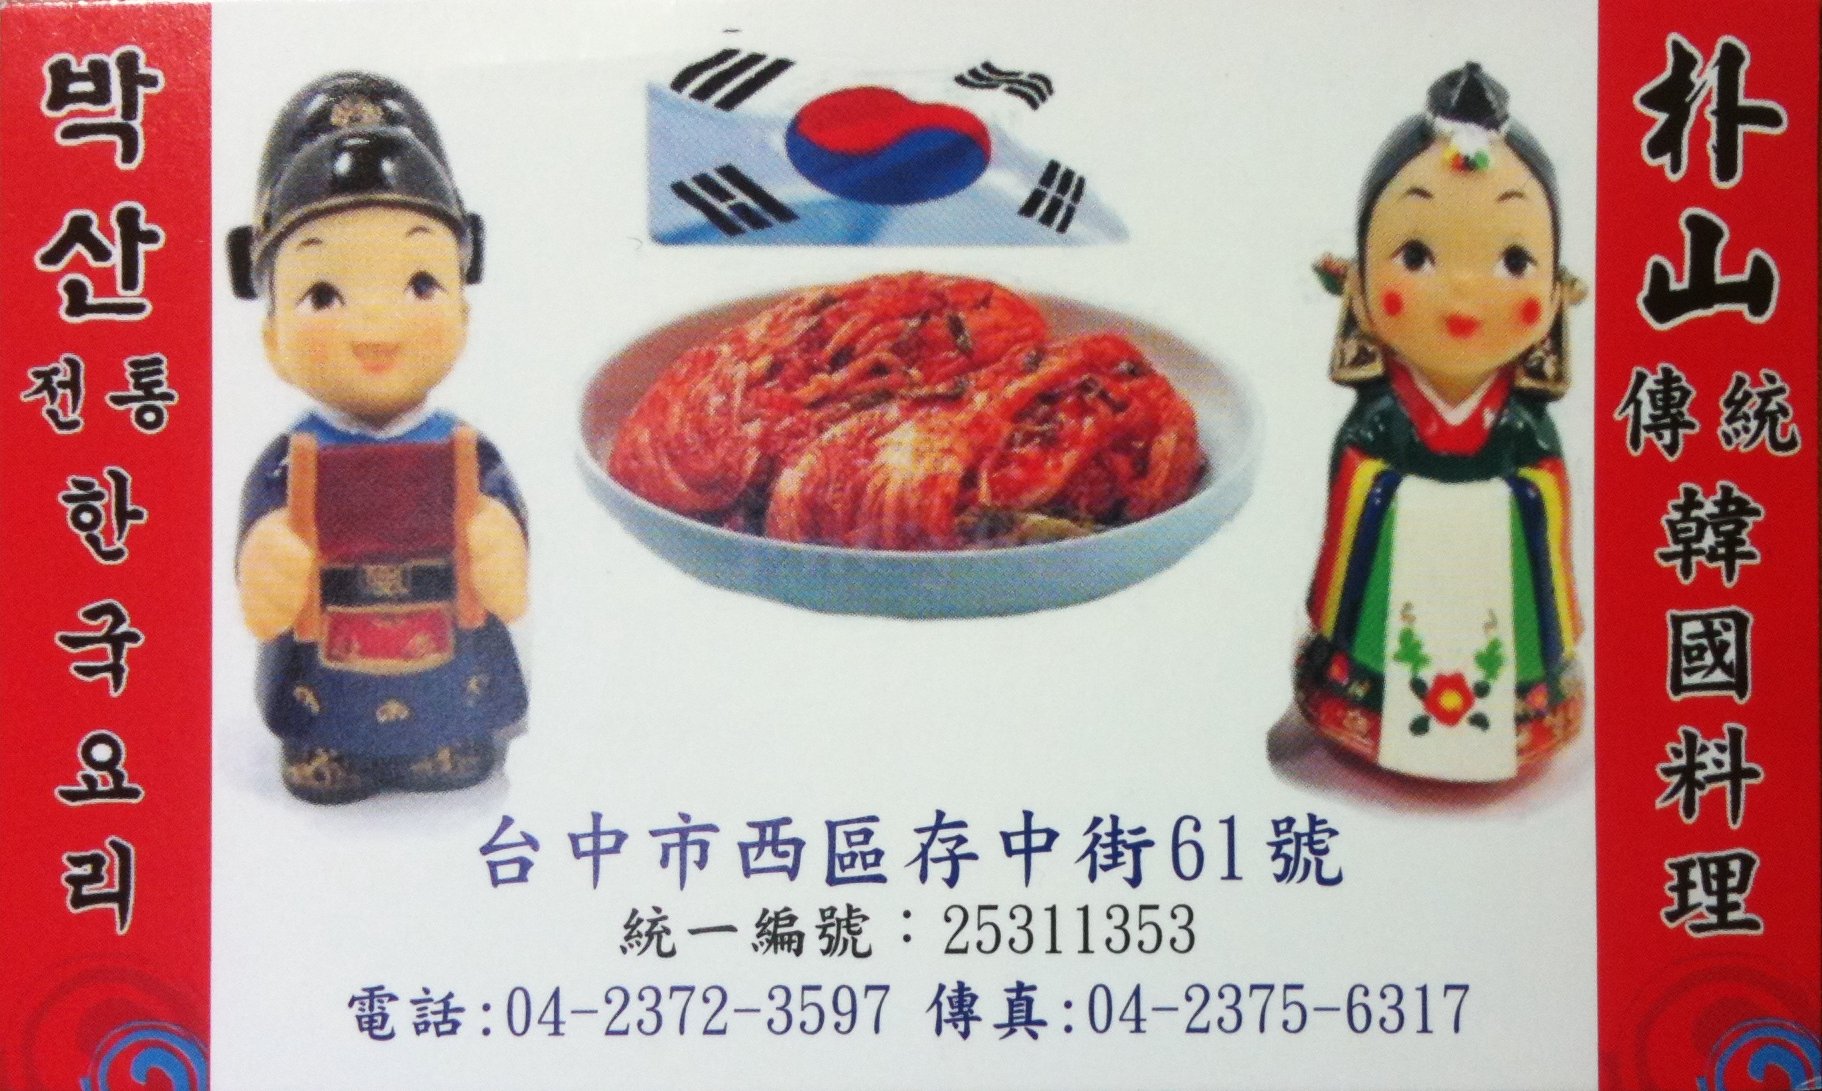 advertising sign on a store in china with dolls and food